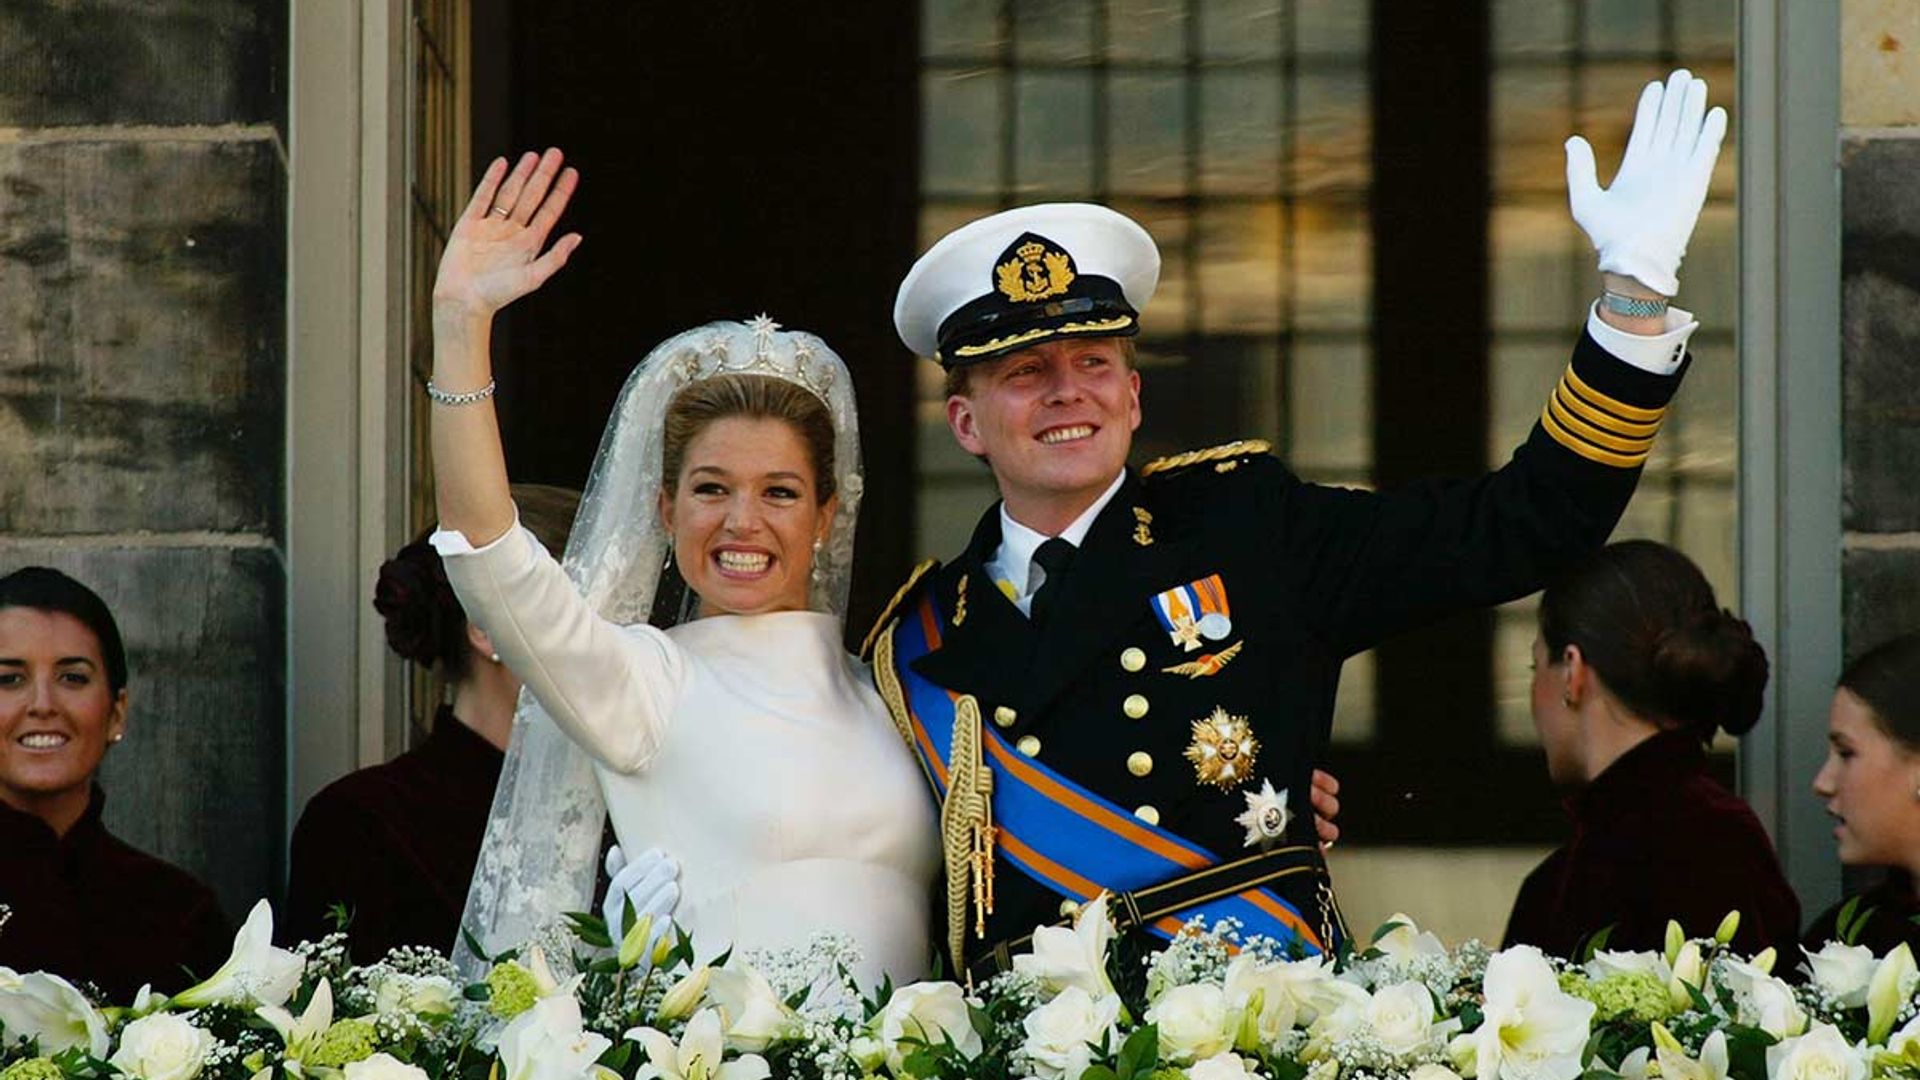 Queen Maxima and King Willem-Alexander celebrate 20th wedding anniversary - photos